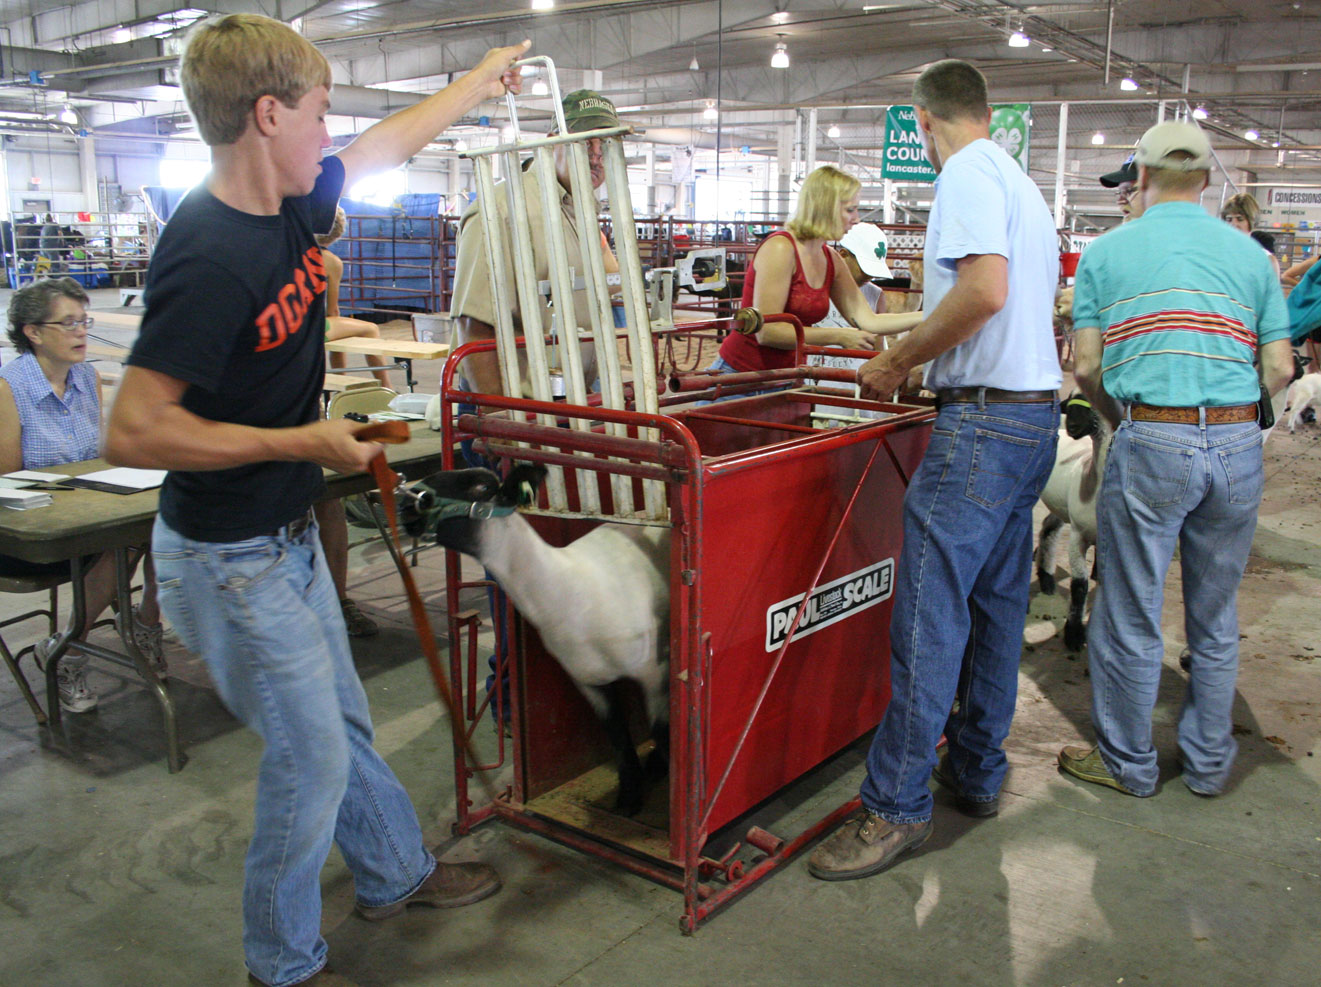 4-H/FFA members exhibiting market sheep need to have their lambs officially tagged and weighed on May 2.